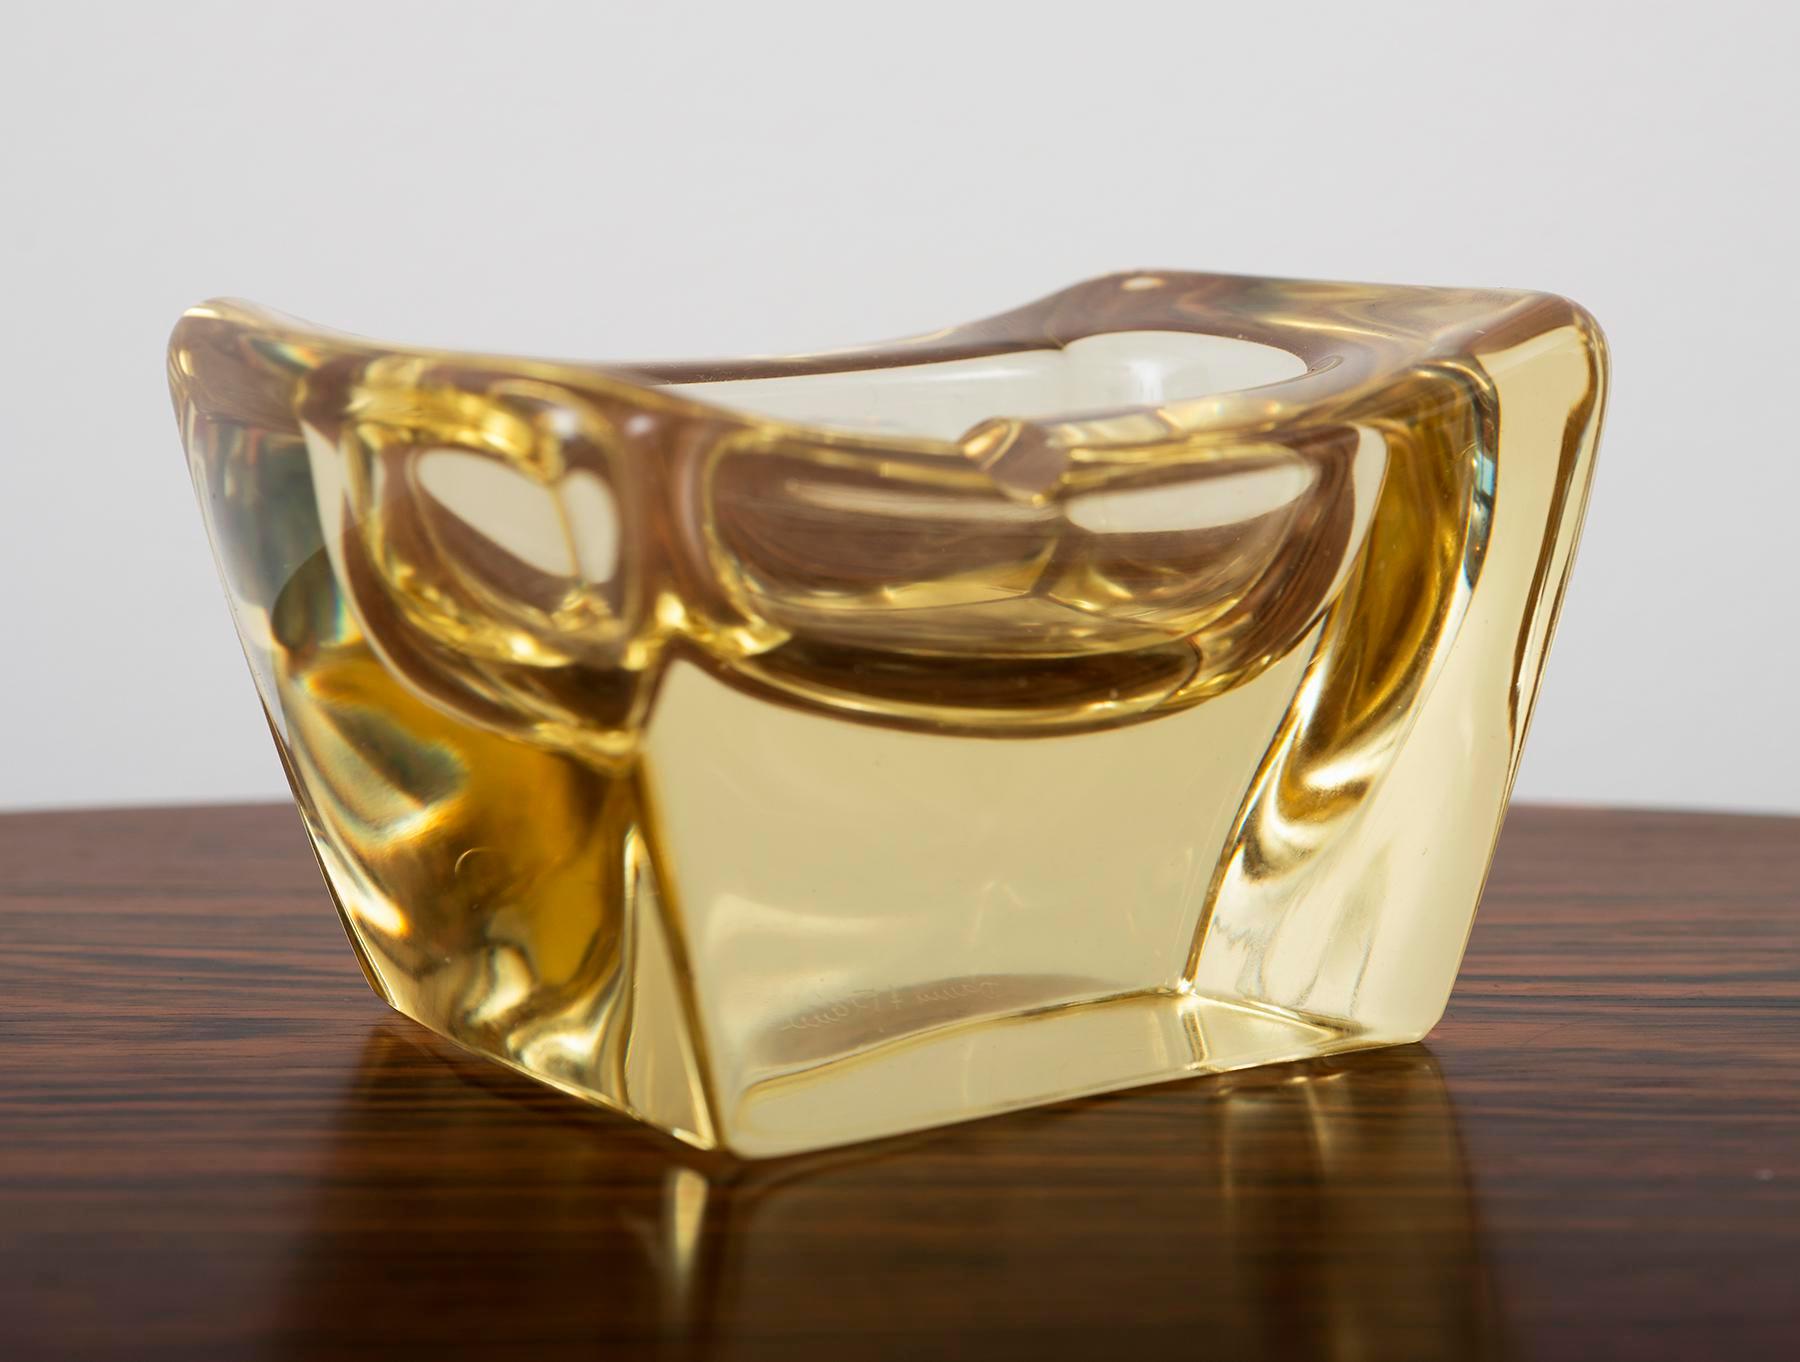 Striking, thick crystal ashtray in a rare yellow by Daum, France, 1950s.